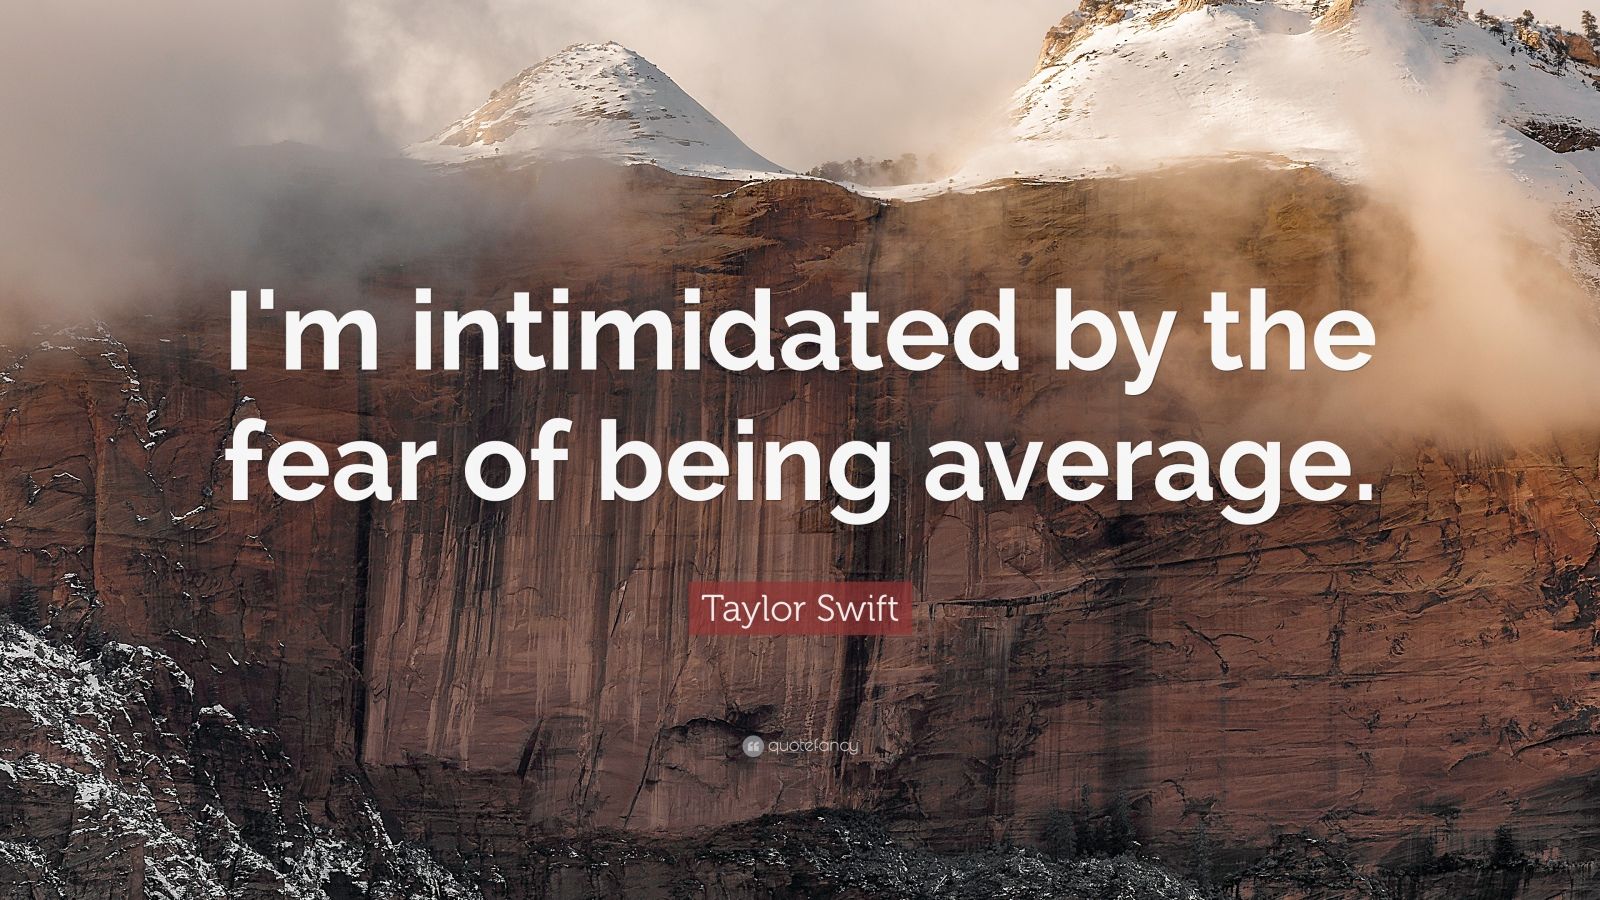 Taylor Swift Quote “I'm intimidated by the fear of being average.” (15